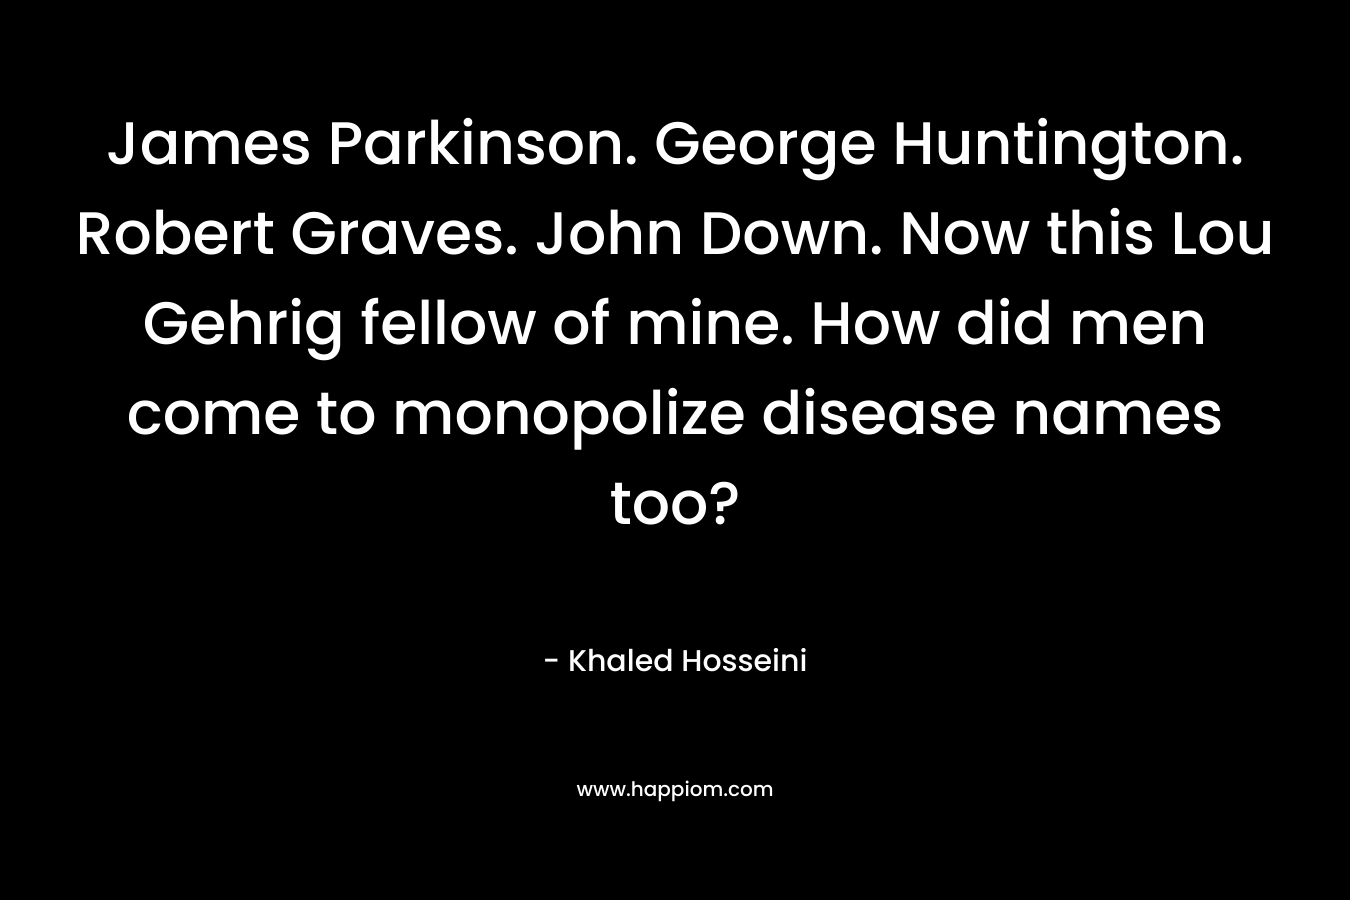 James Parkinson. George Huntington. Robert Graves. John Down. Now this Lou Gehrig fellow of mine. How did men come to monopolize disease names too? – Khaled Hosseini